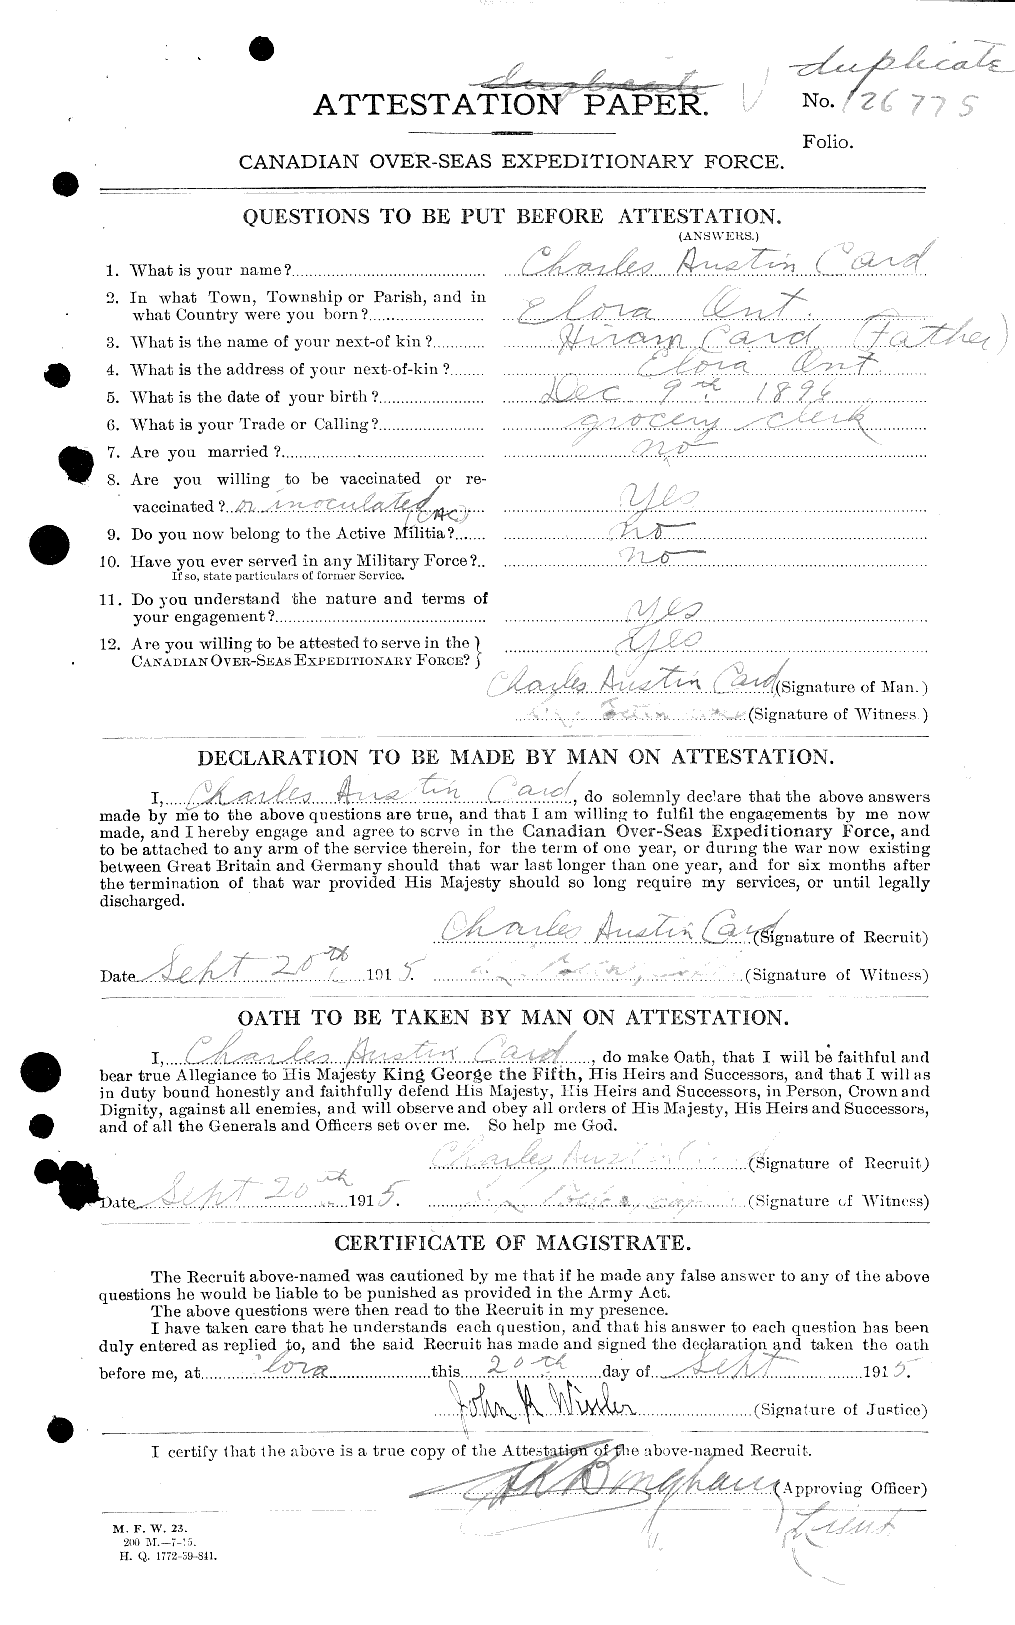 Personnel Records of the First World War - CEF 003070a